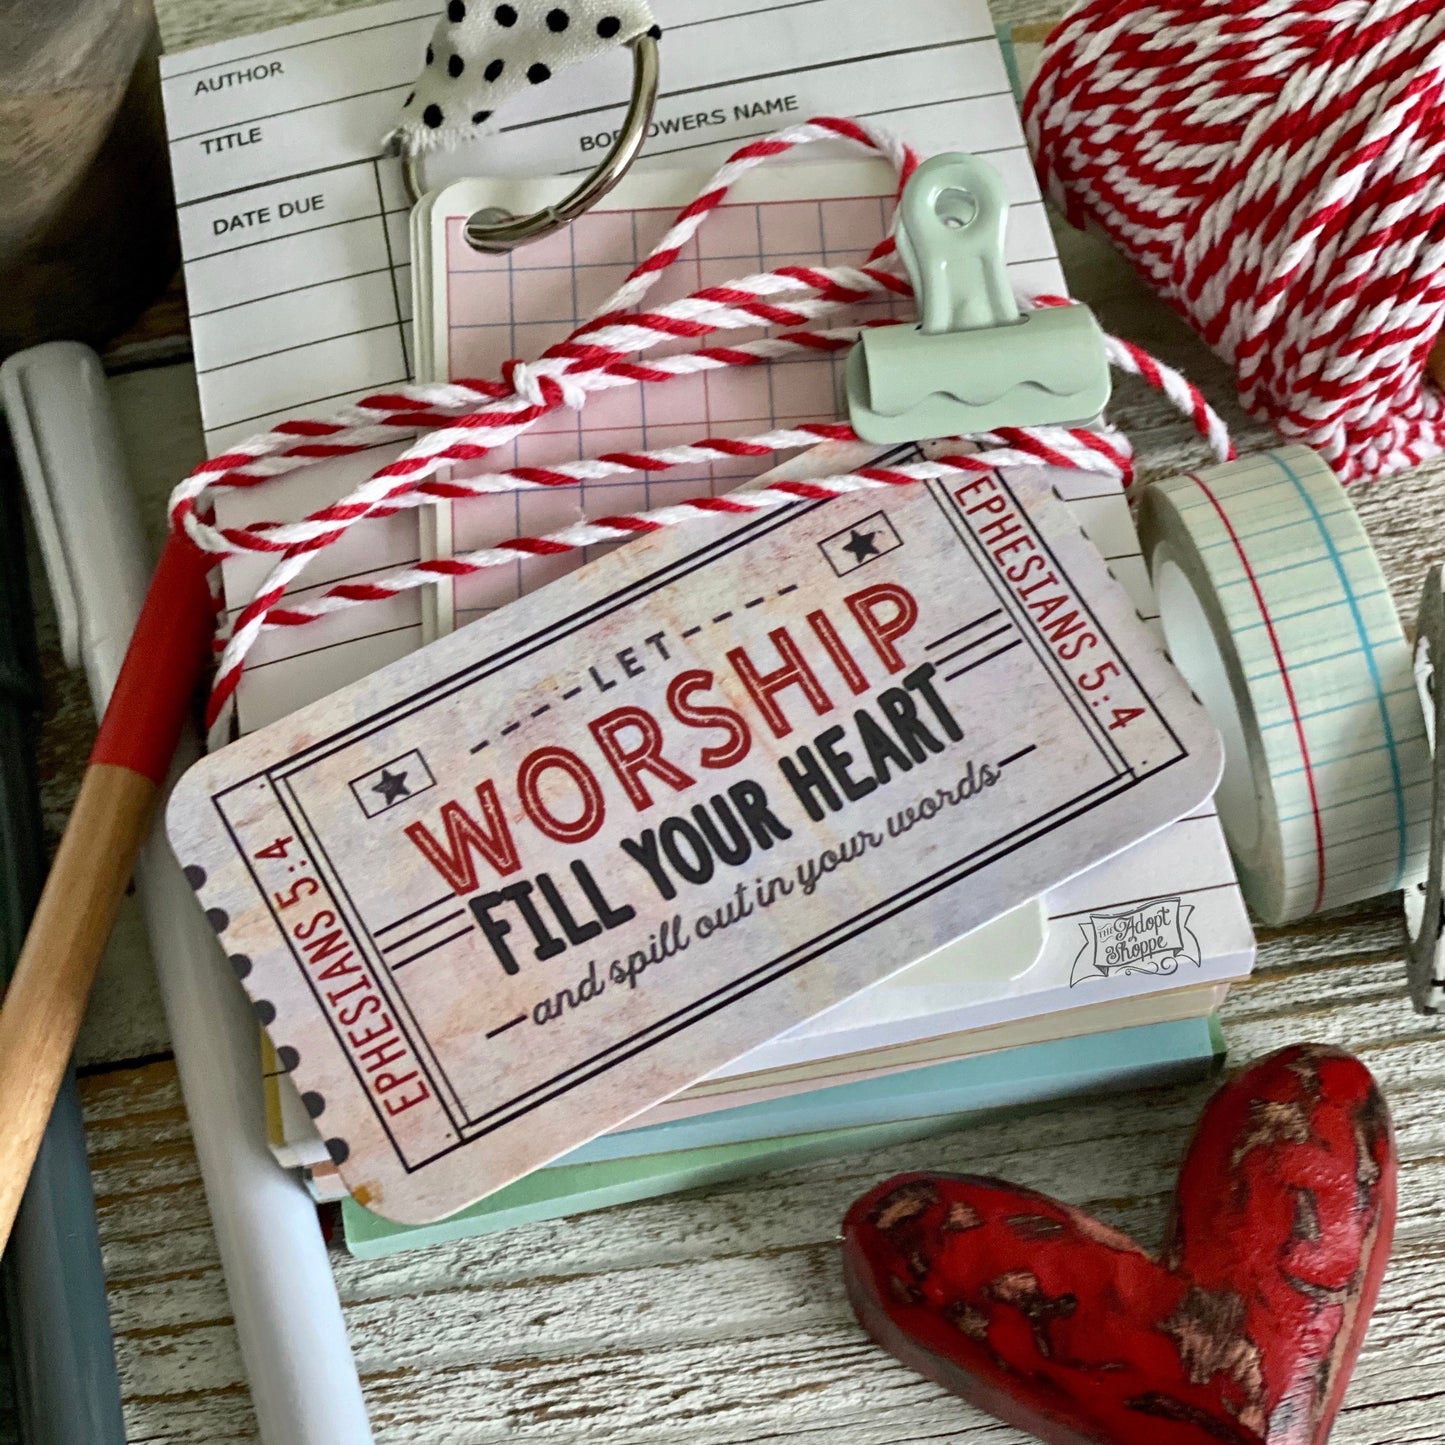 let worship fill your heart red/pink ticket #TheAdoptShoppecard